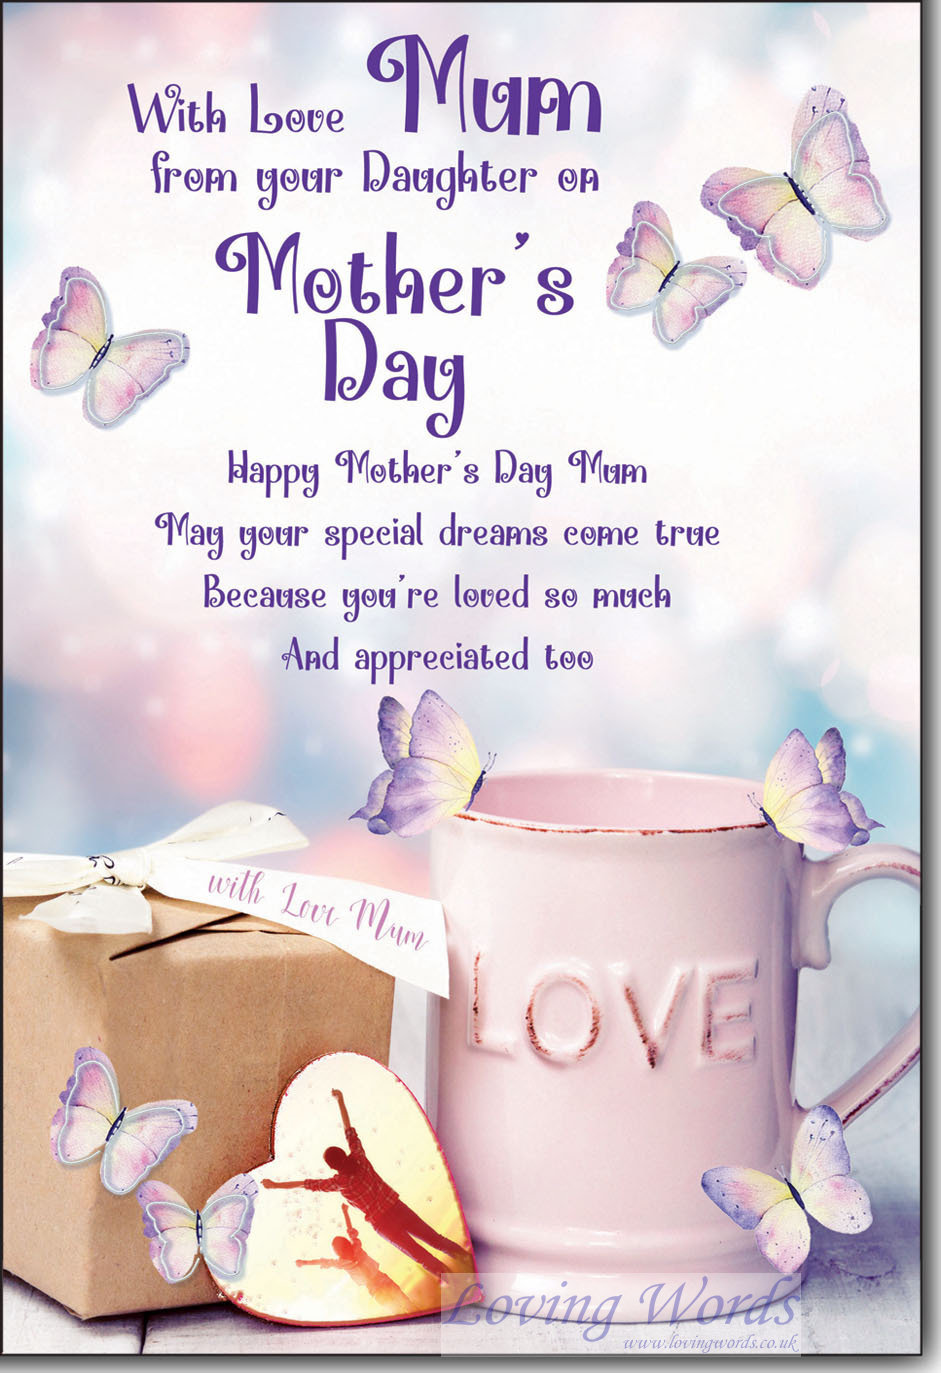 With Love Mum From Your Daughter On Mothers Day Greeting Cards By Loving Words 